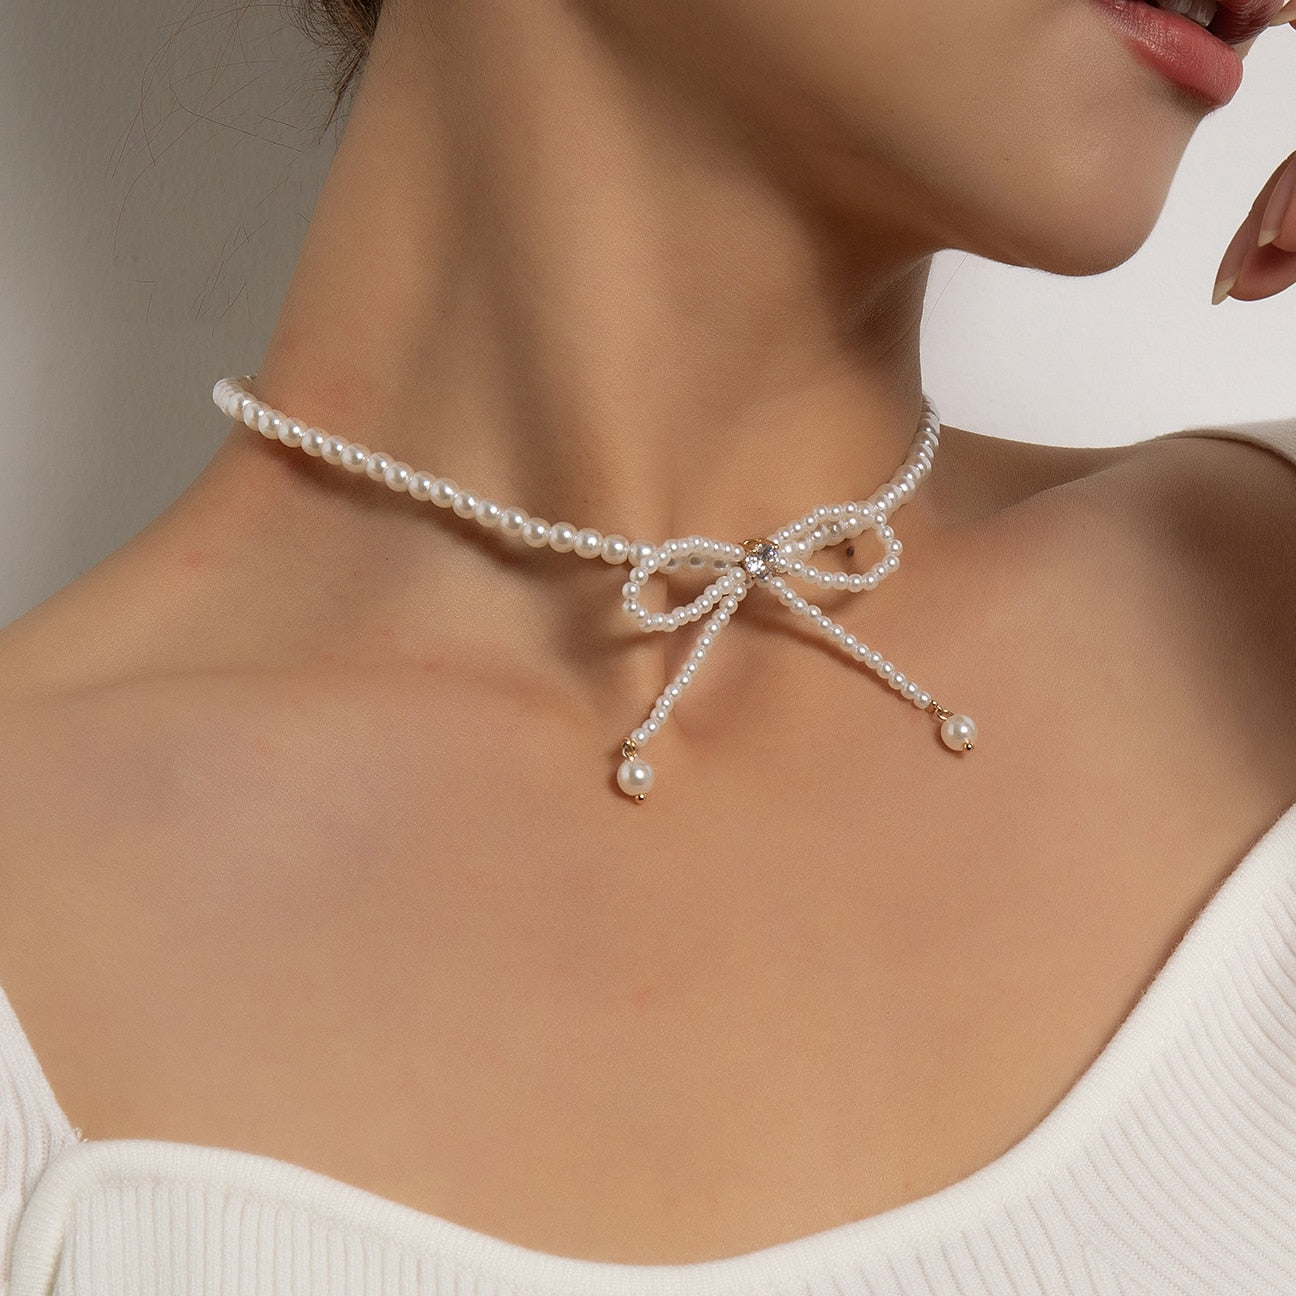 Elegant White Pearl Inspired Bowknot Choker Necklace